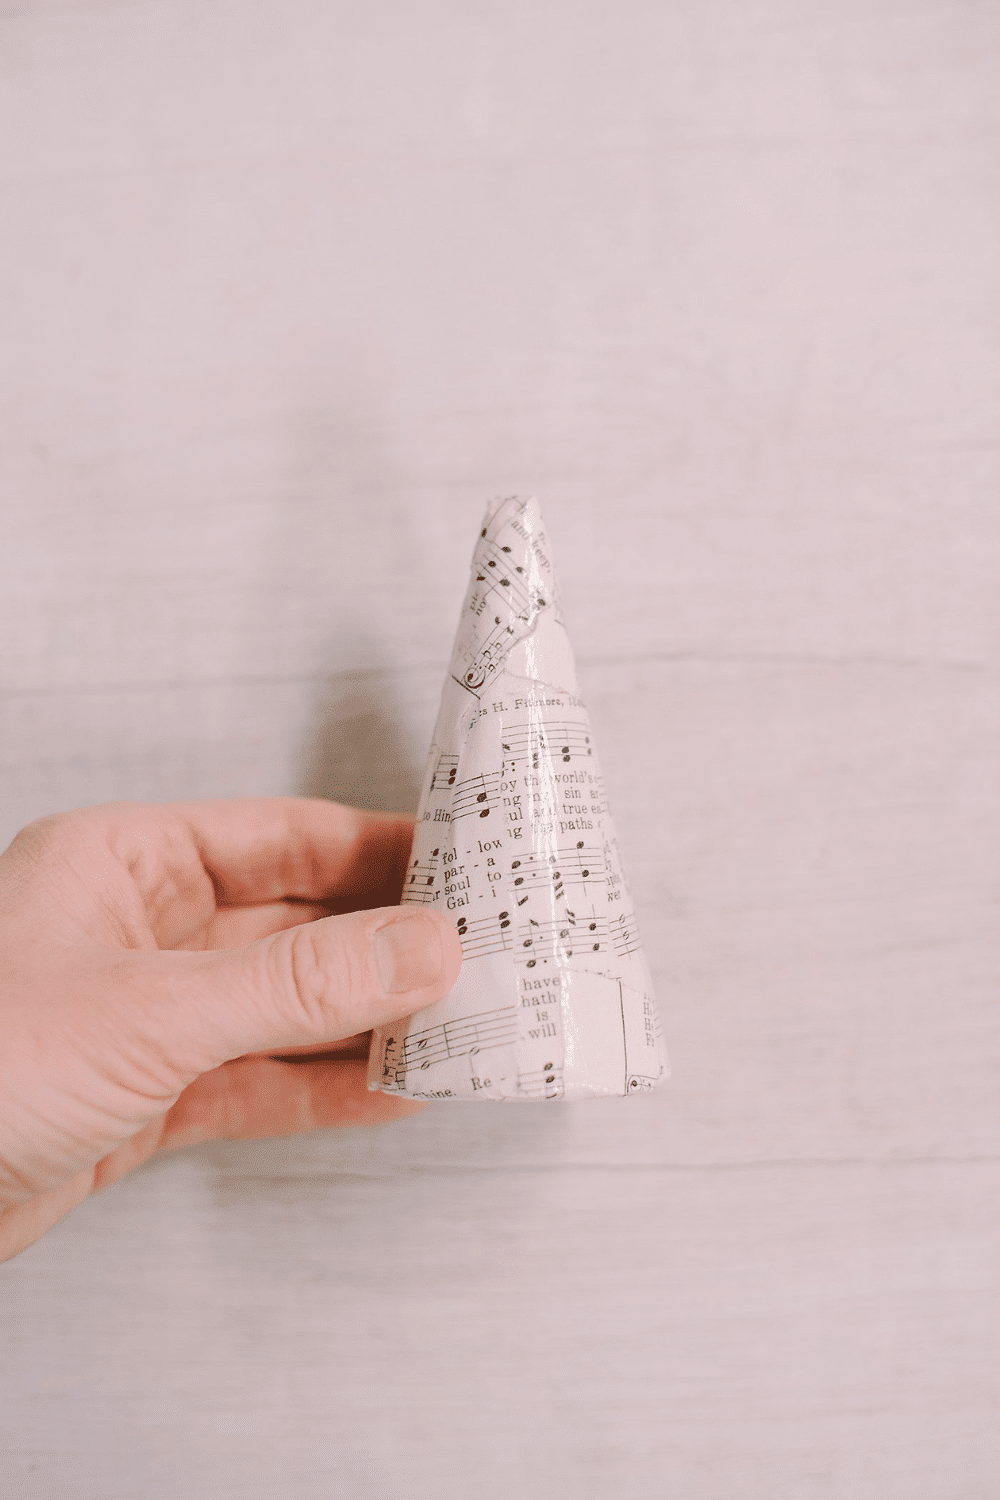 How to Make a DIY Mod Podge Book Page Cone Tree